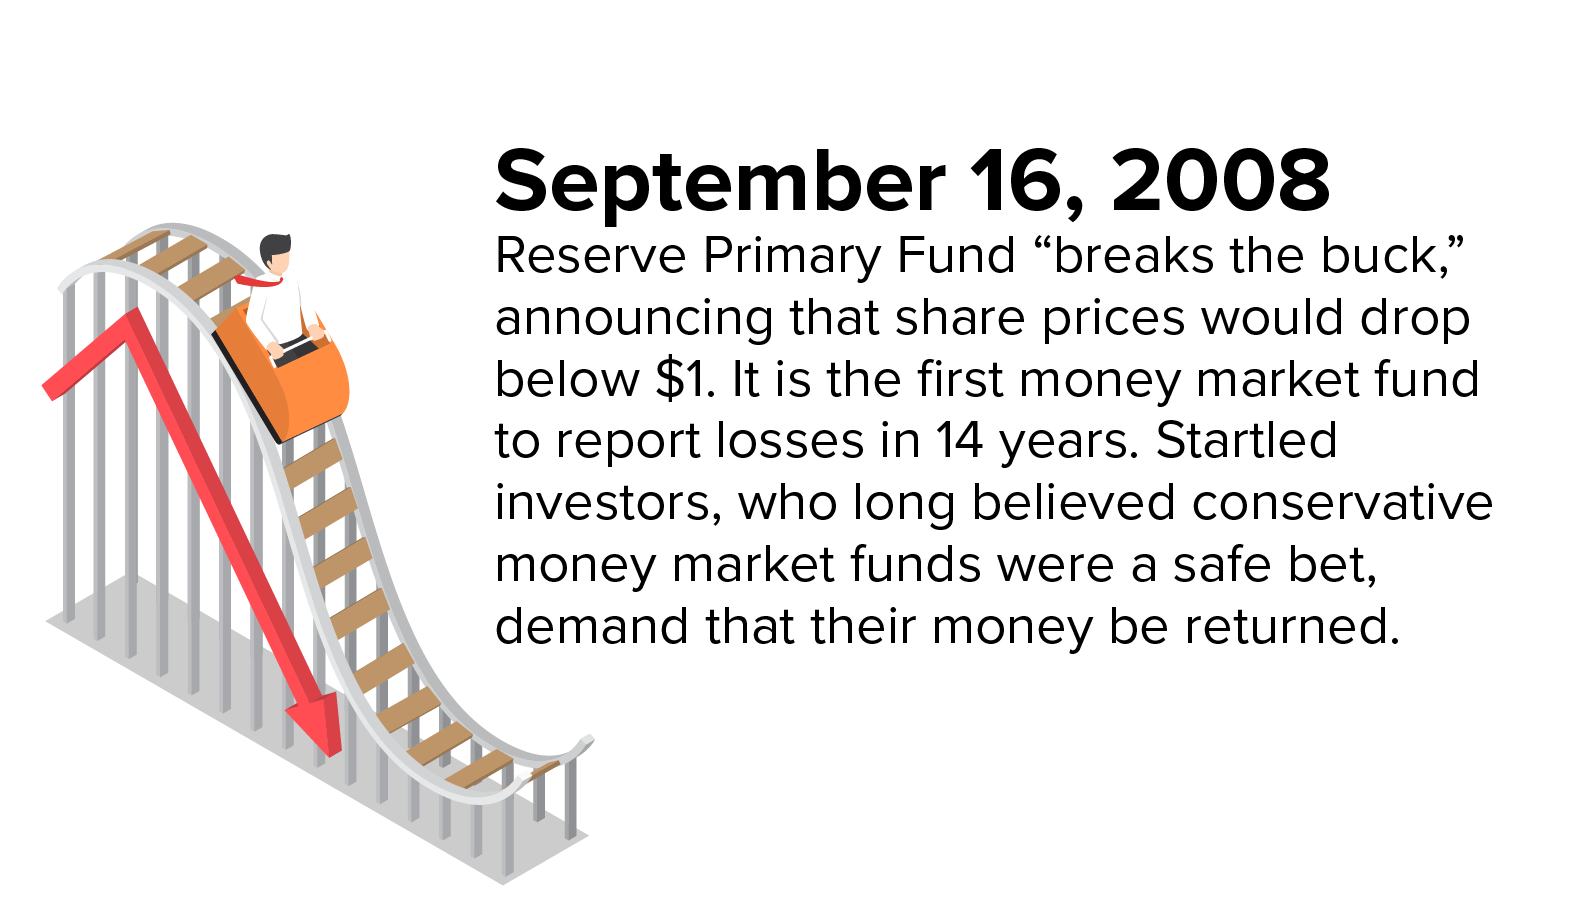 A graphic of a man riding a stock market roller coaster illustrates what many investors felt when the Reserve Primary Fund “broke the buck” in September 2008.